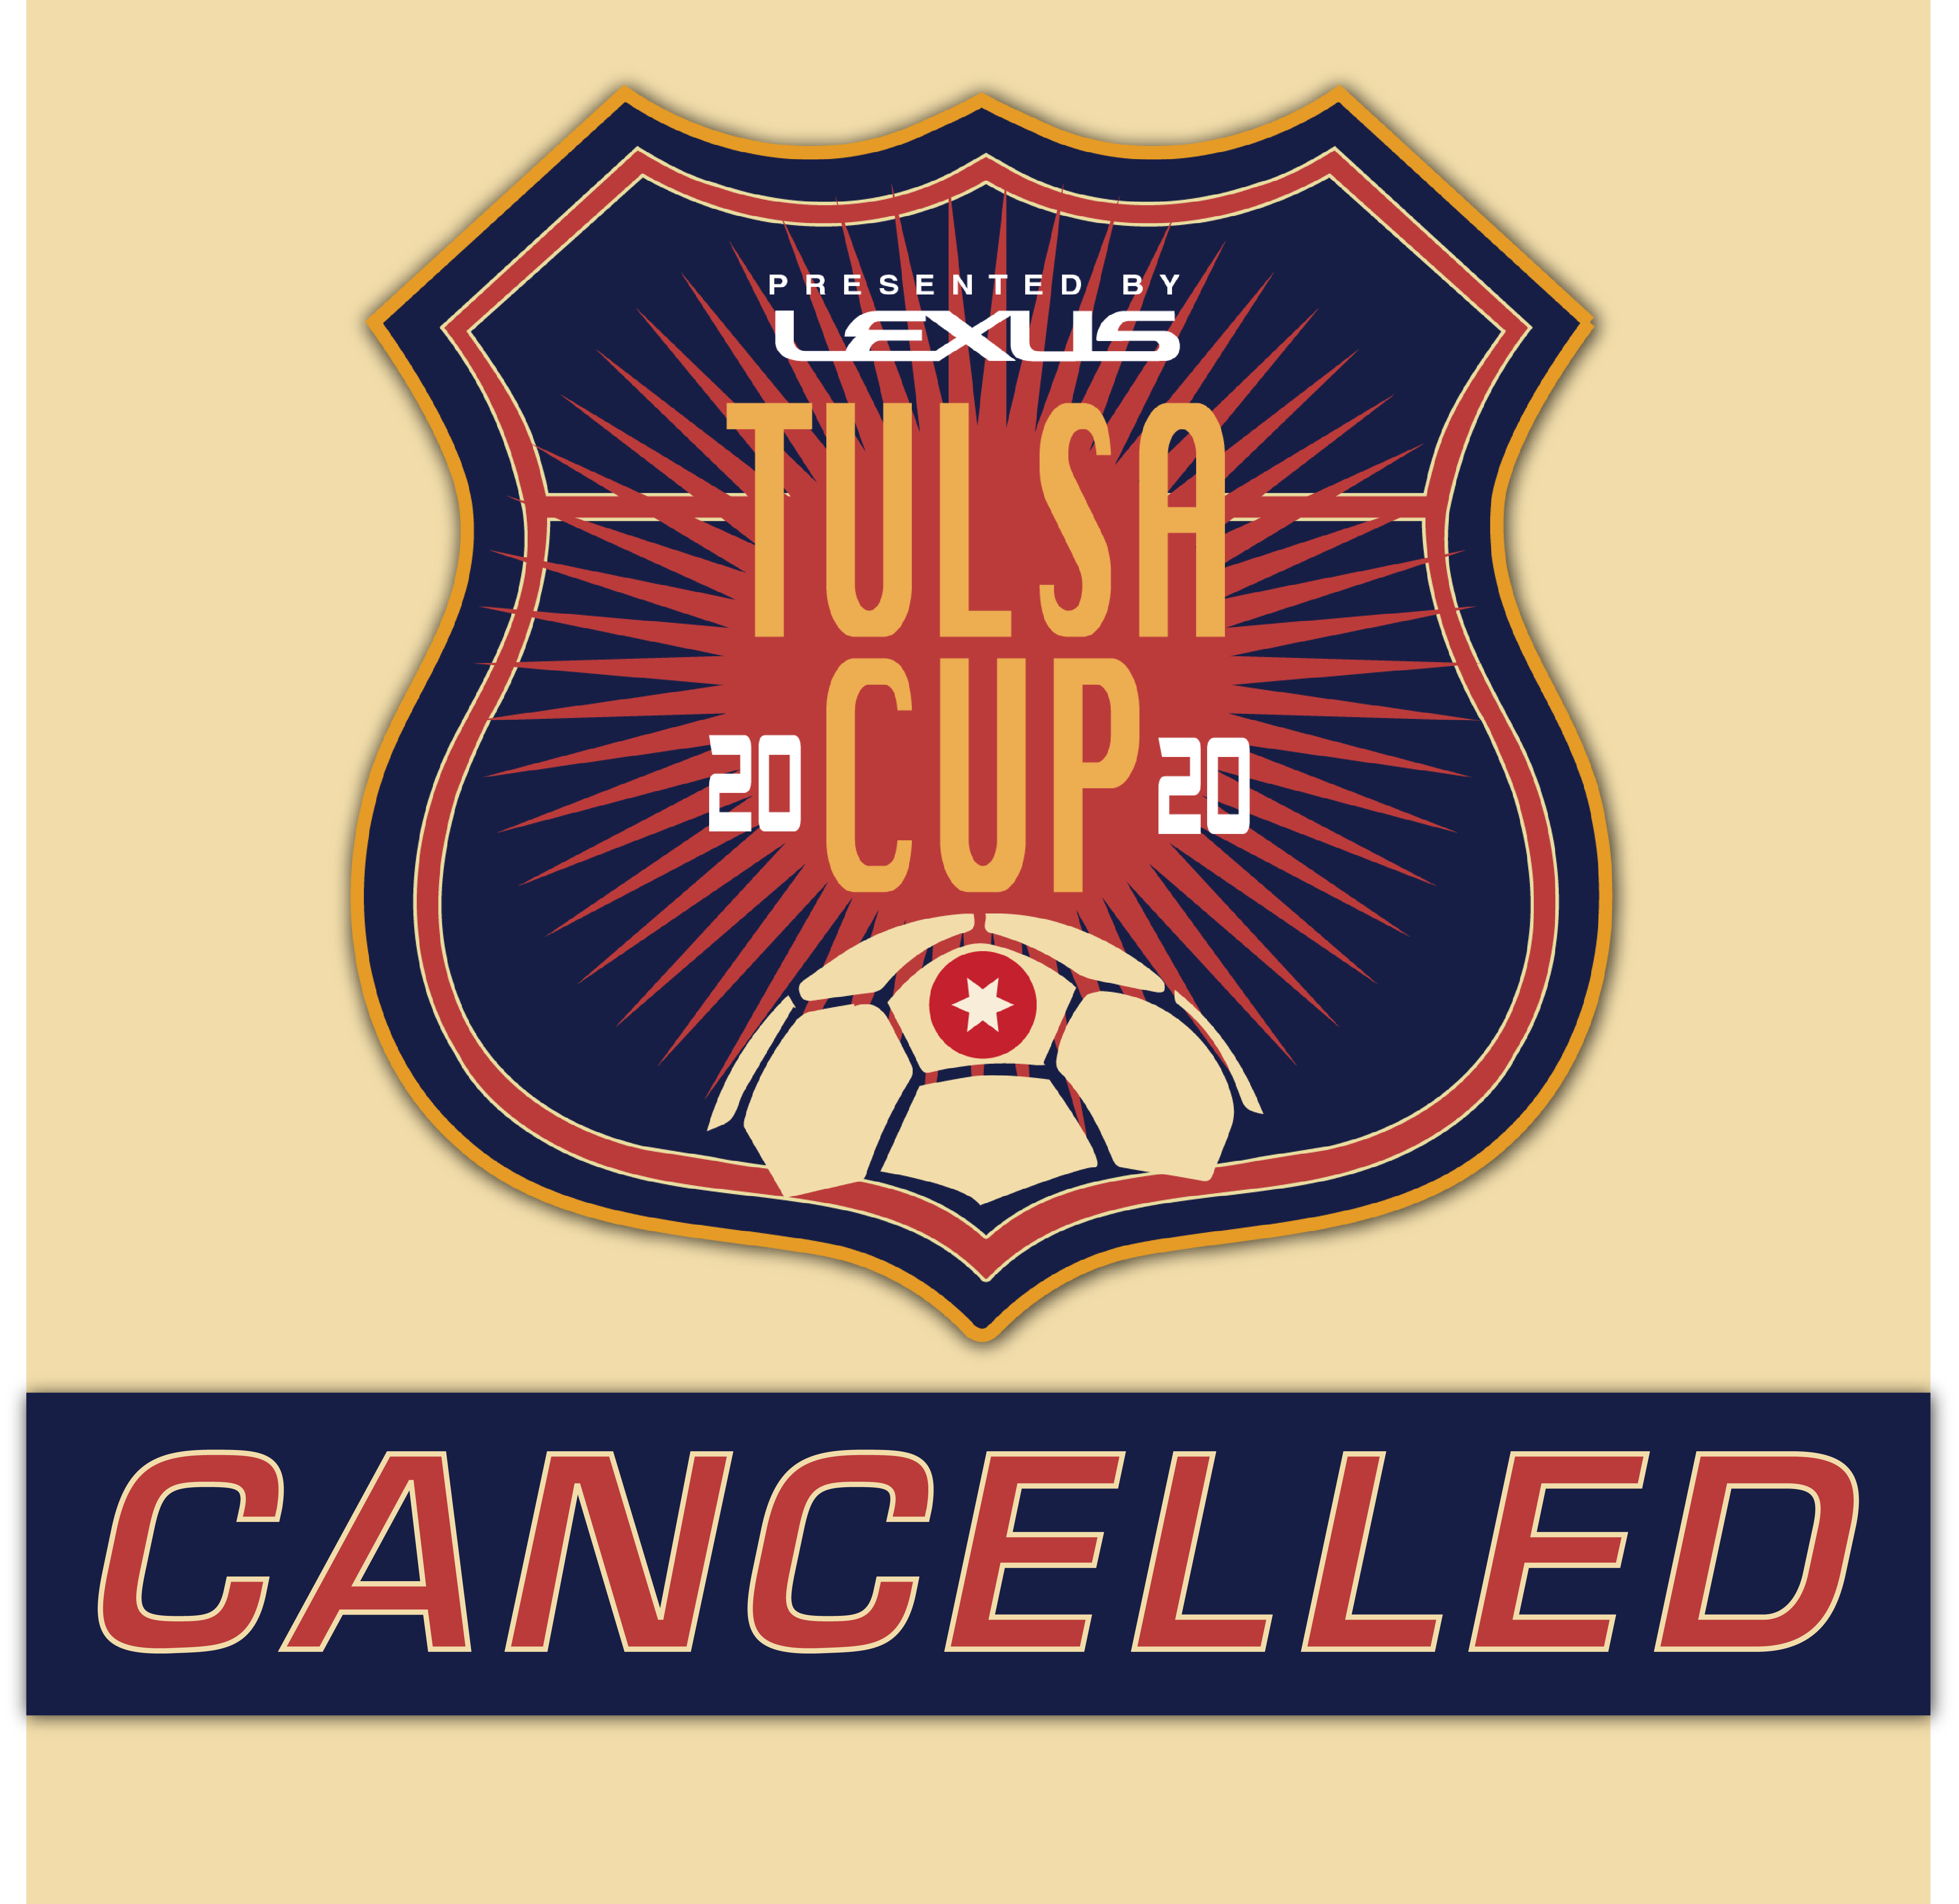 Tulsa Cup Cancelled